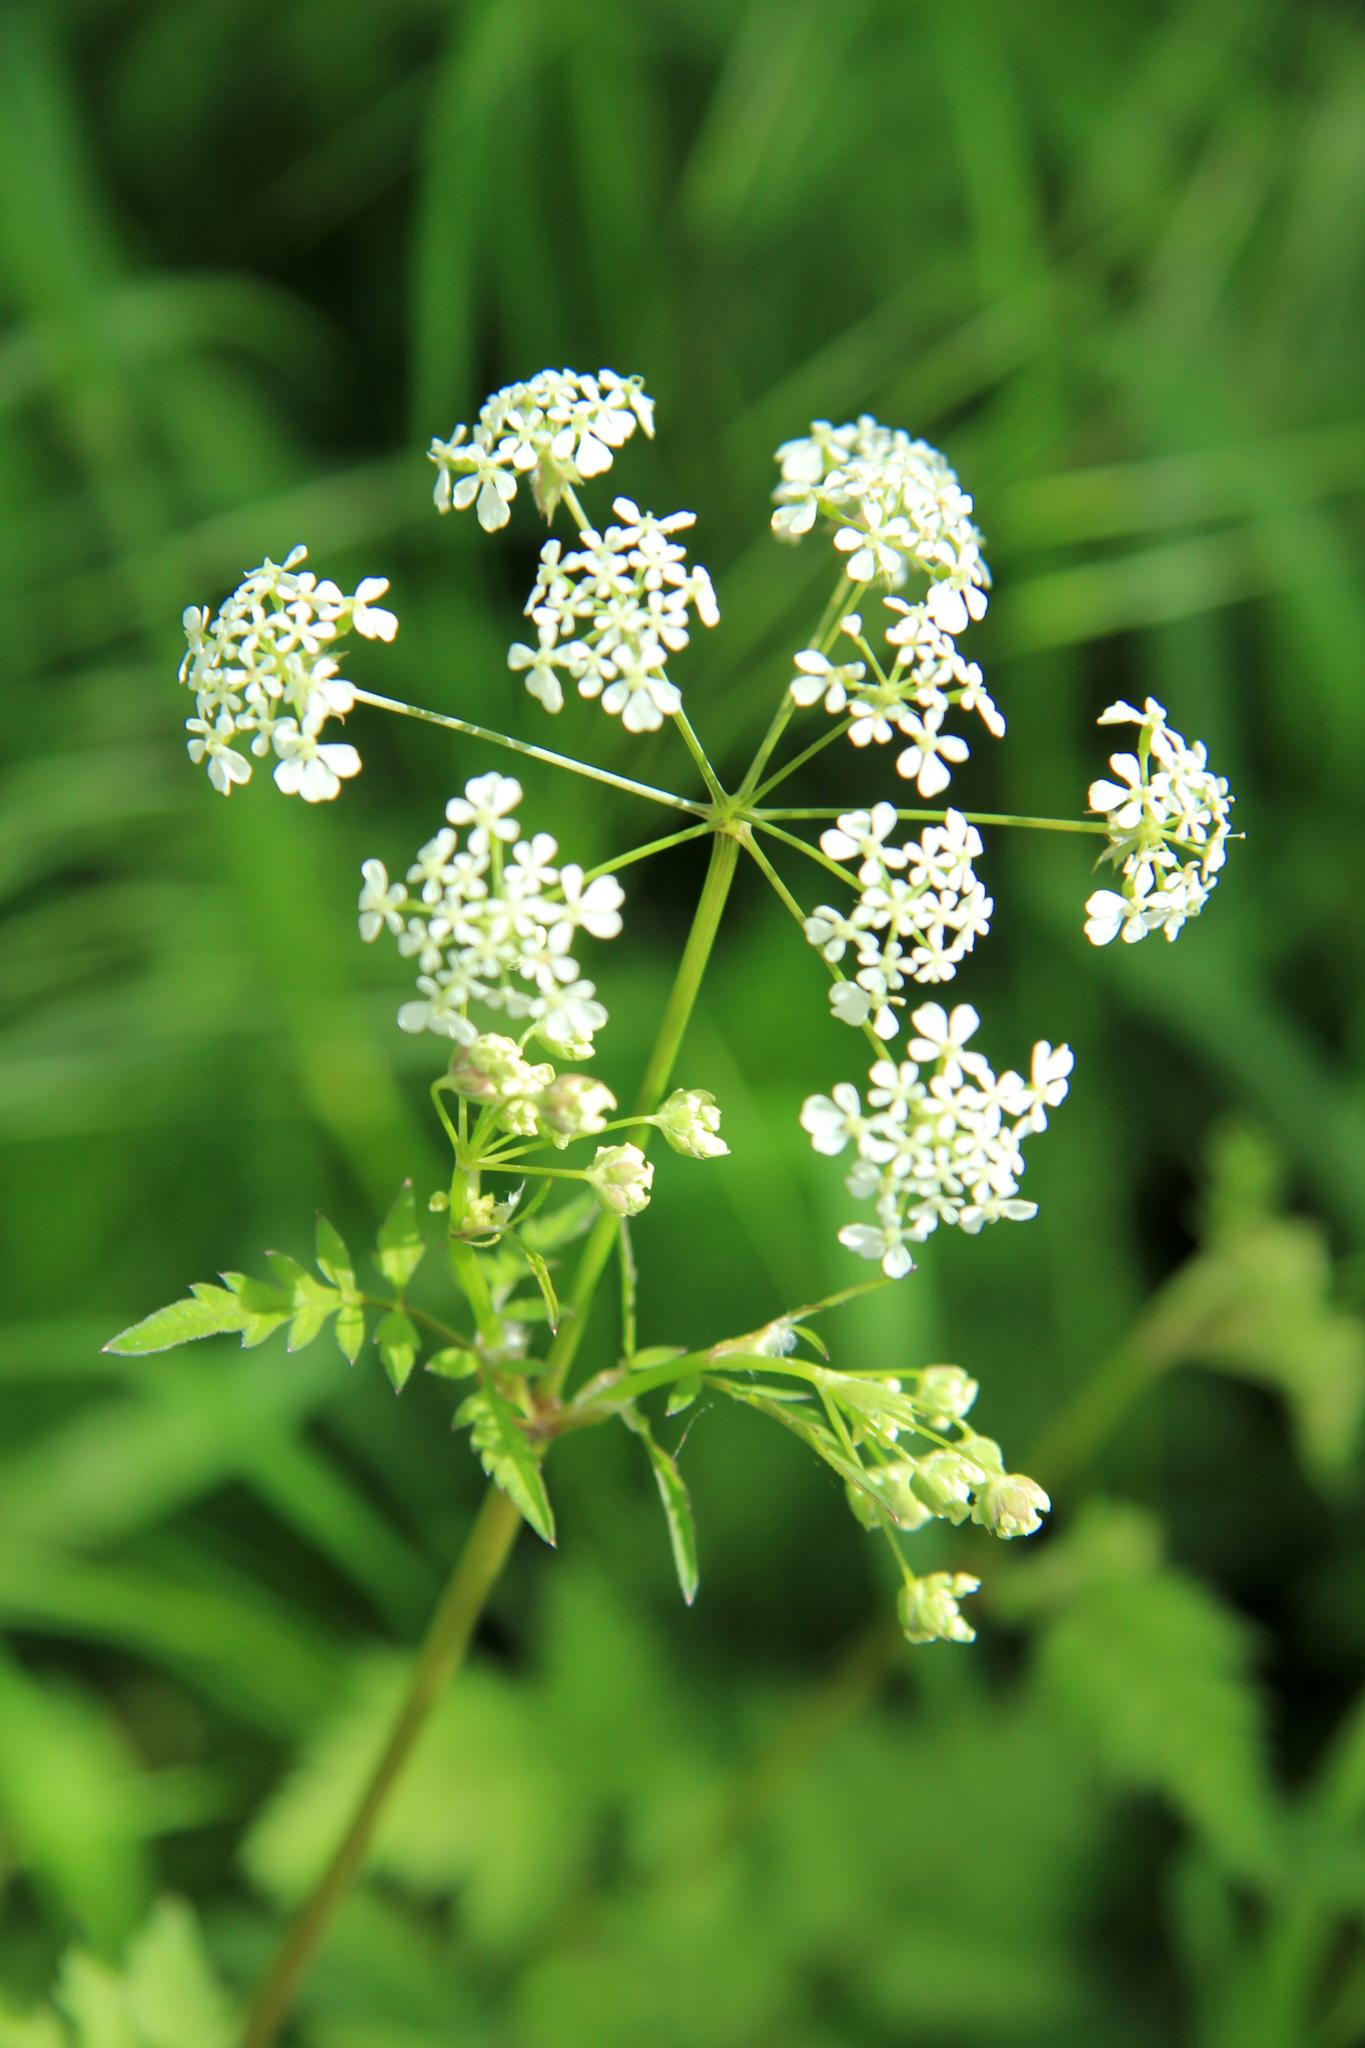 a flower with lots of white flowers sitting in a green field